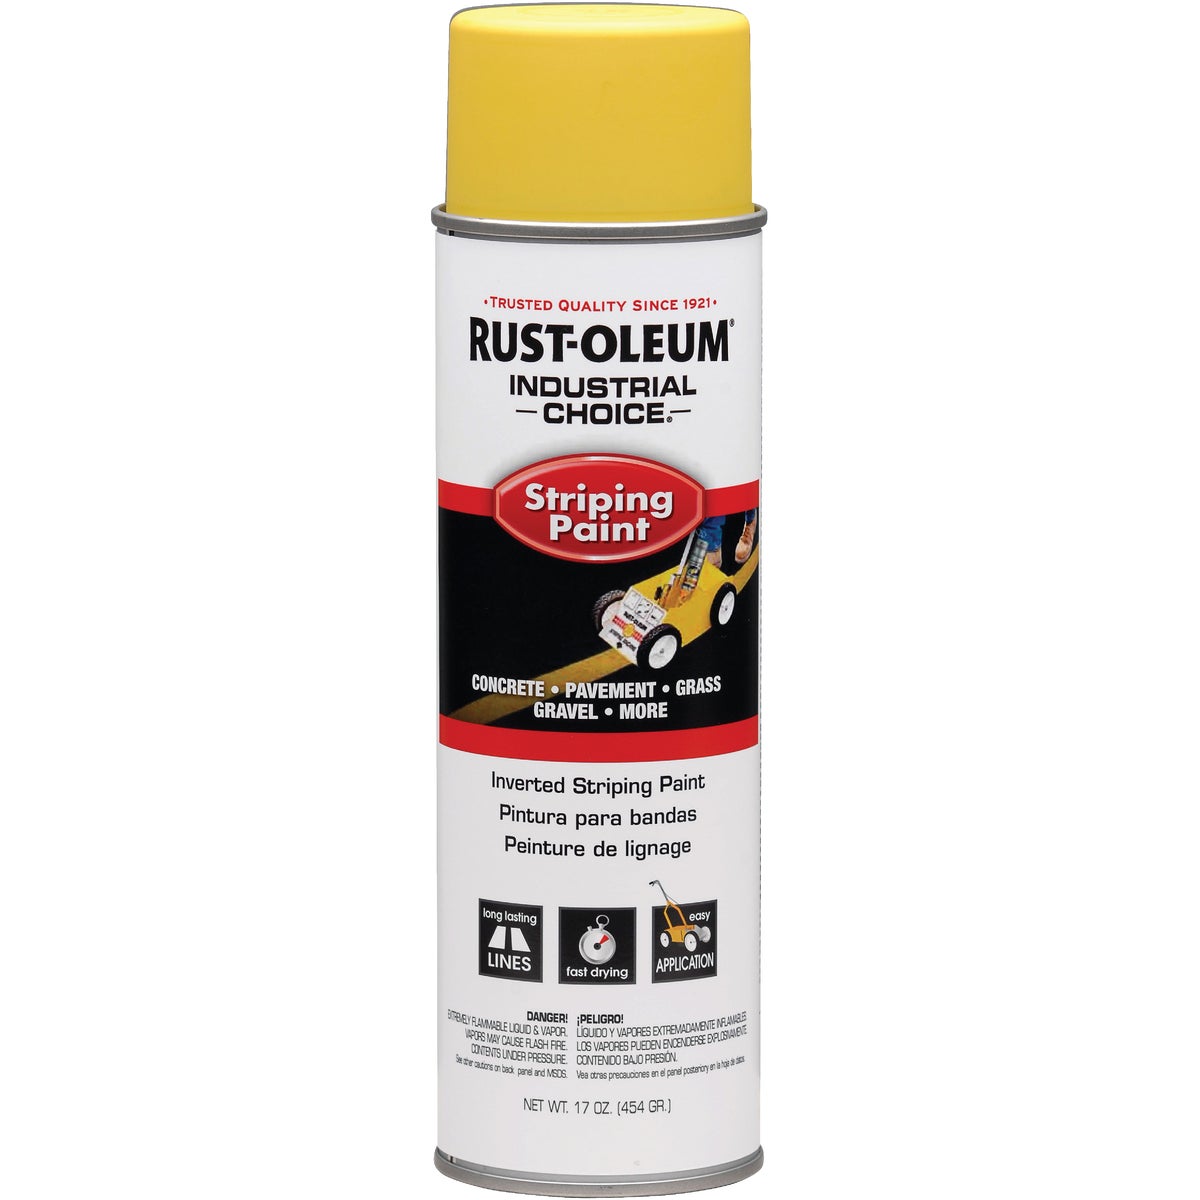 Rust-Oleum Industrial Choice Yellow 17 Oz. Striping Paint 